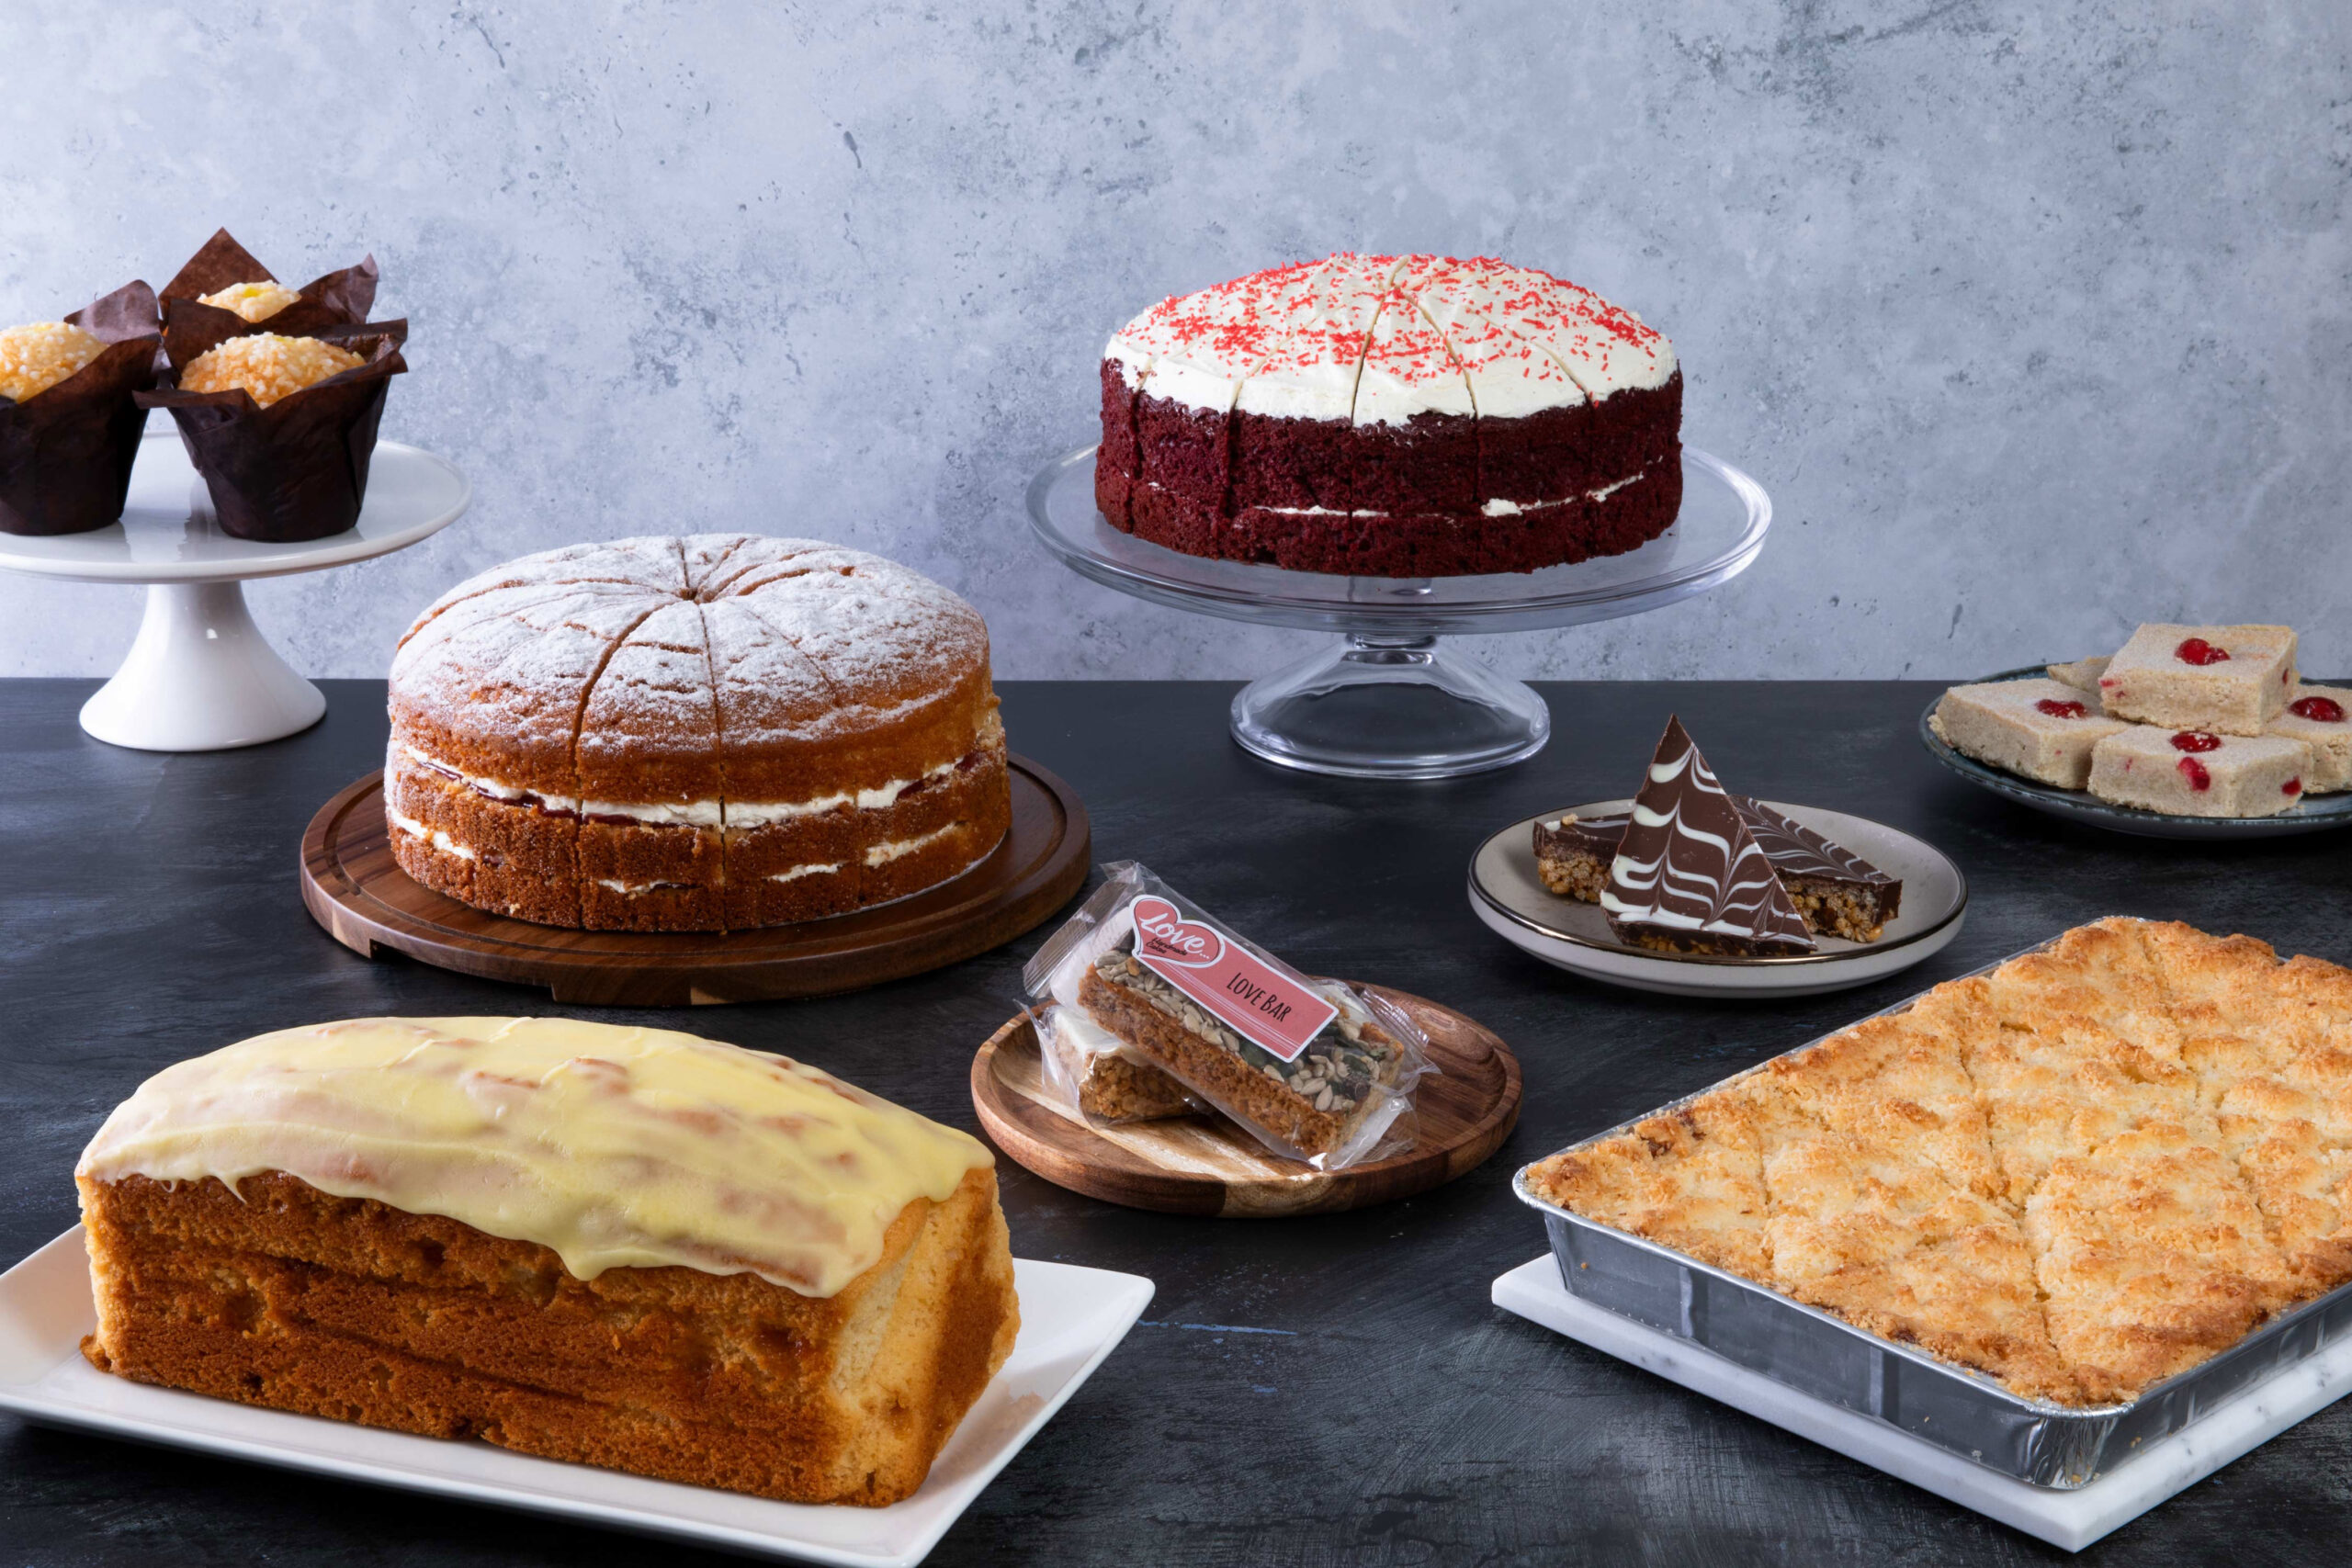 Yorkshire-based cake manufacturer Love Handmade Cakes has been acquired by Regal Food Products Group Plc for an undisclosed sum. The acquisition comes just 24 months after the Regal group snapped up premium desserts manufacturer, Just Desserts Yorkshire.